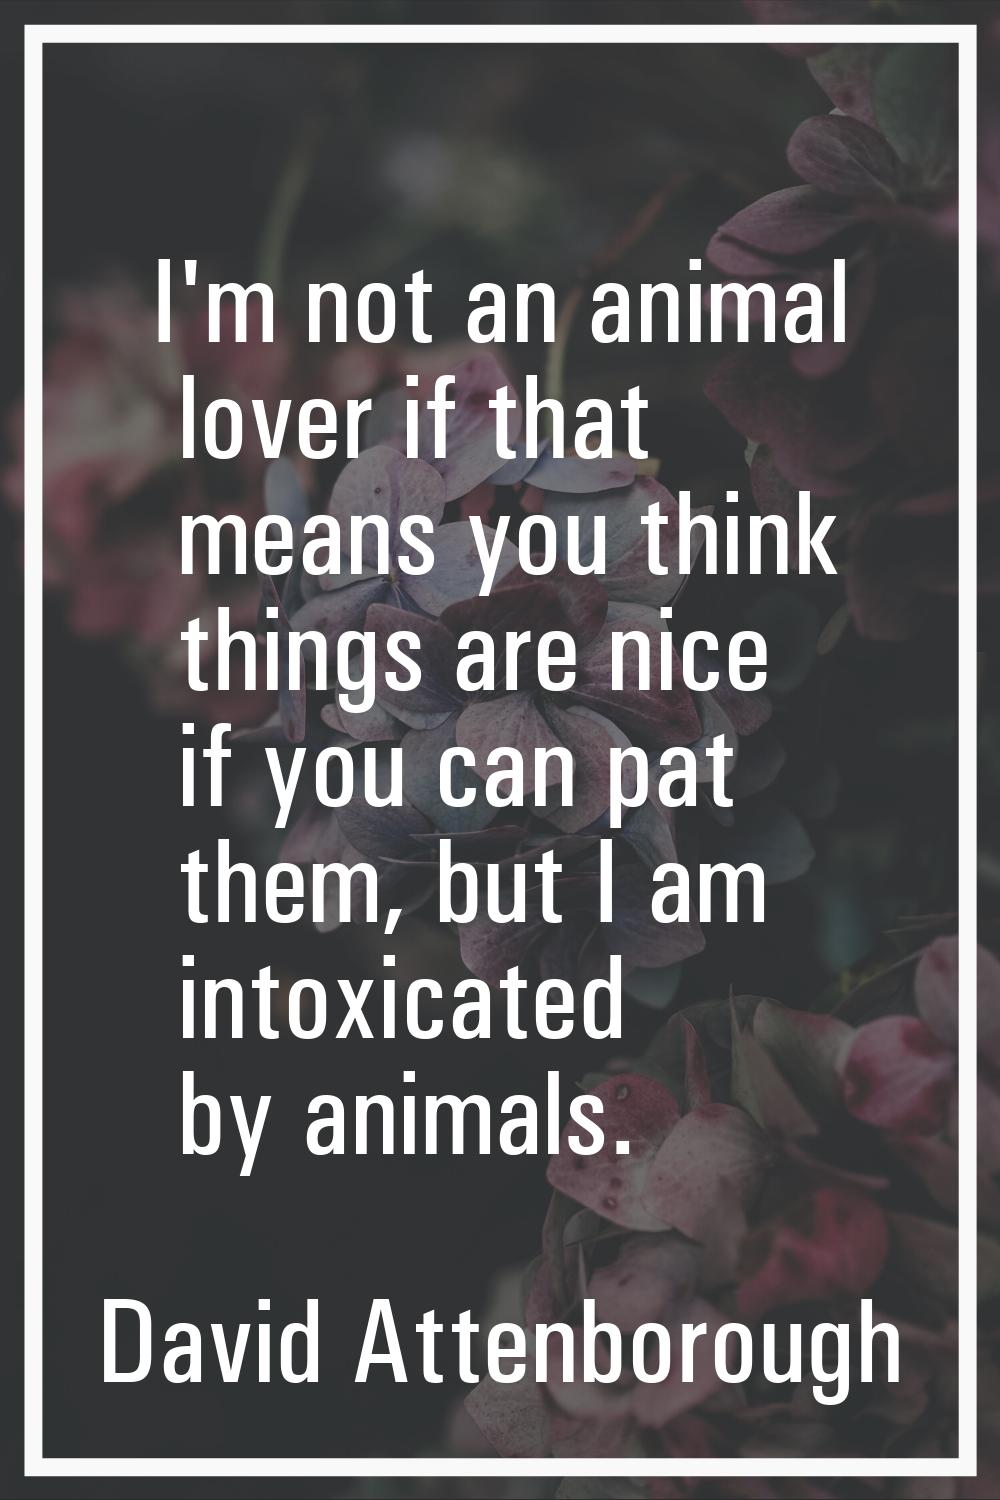 I'm not an animal lover if that means you think things are nice if you can pat them, but I am intox